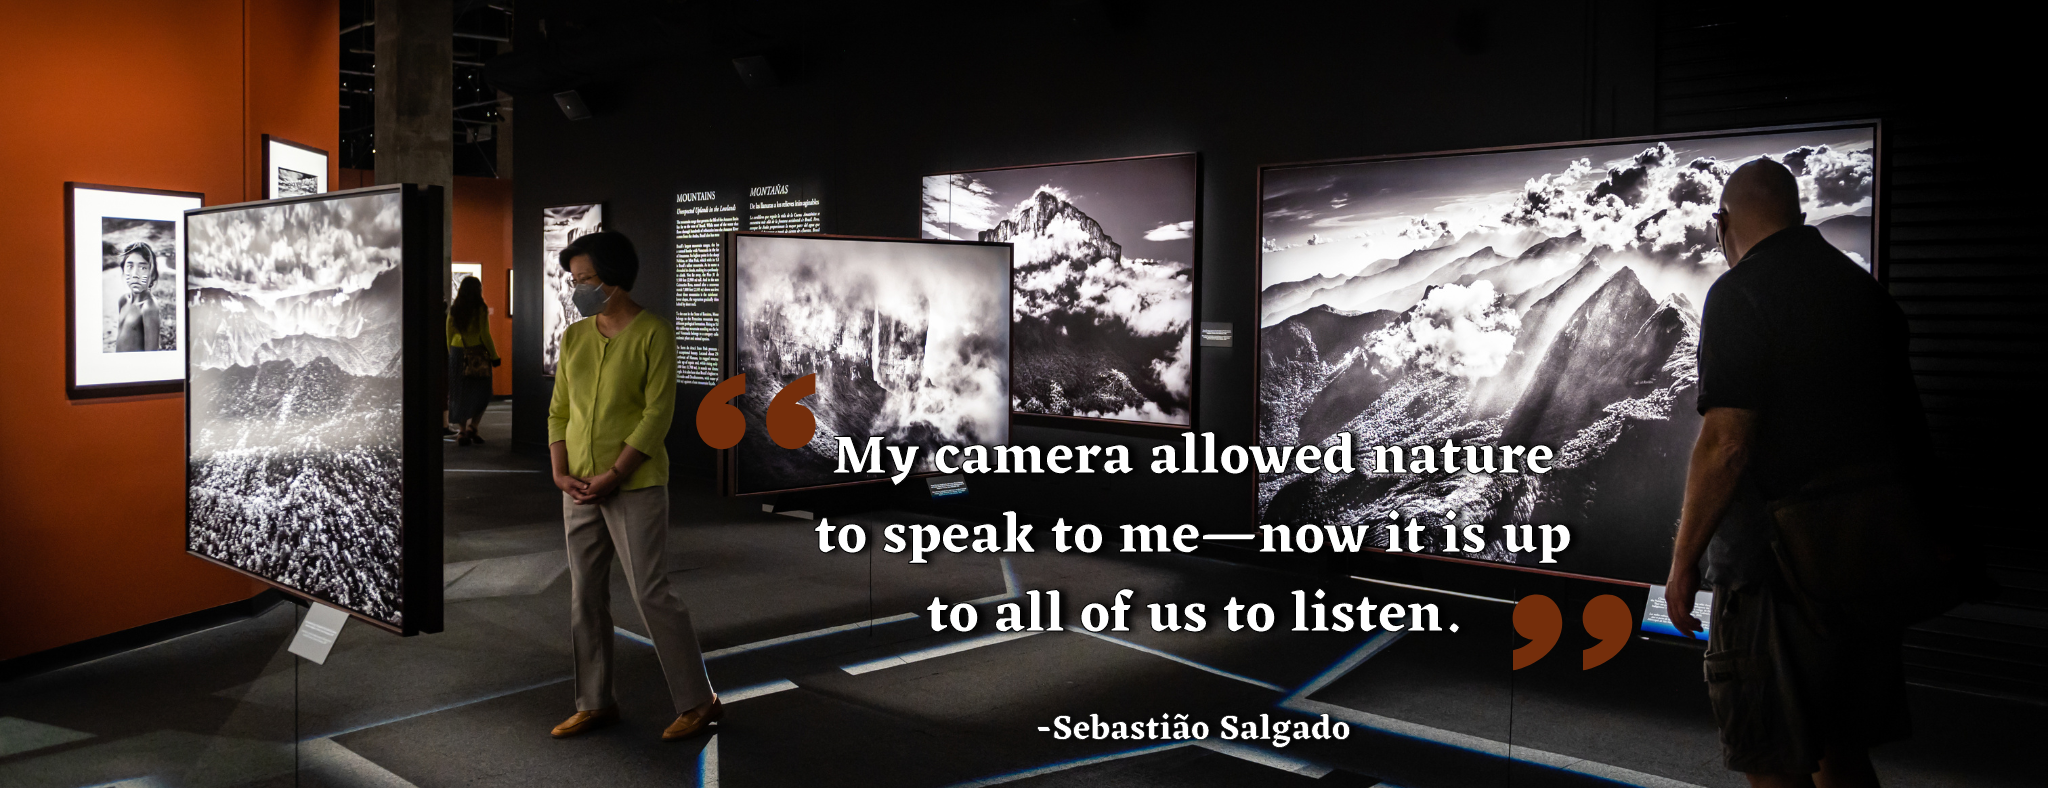 Guests wander through Amazonia exhibit with suspended large-scale photographs. Overlay quote from photographer Sebastiao Salgado reads: My camera allowed nature to speak to me—now it is up to all of us to listen.